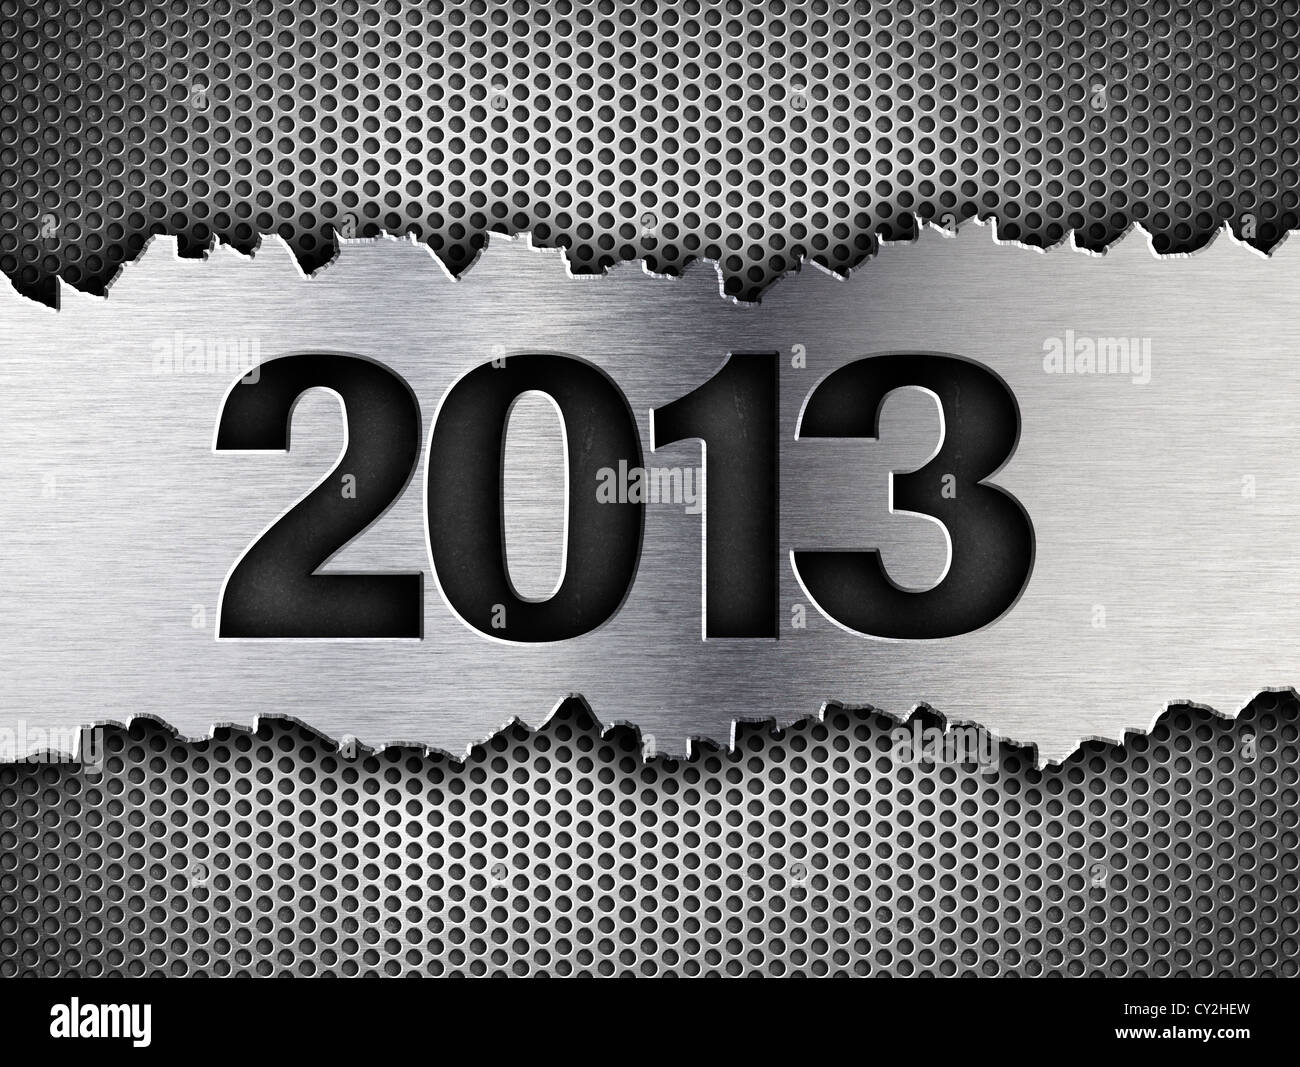 2013 new year metal template Stock Photo